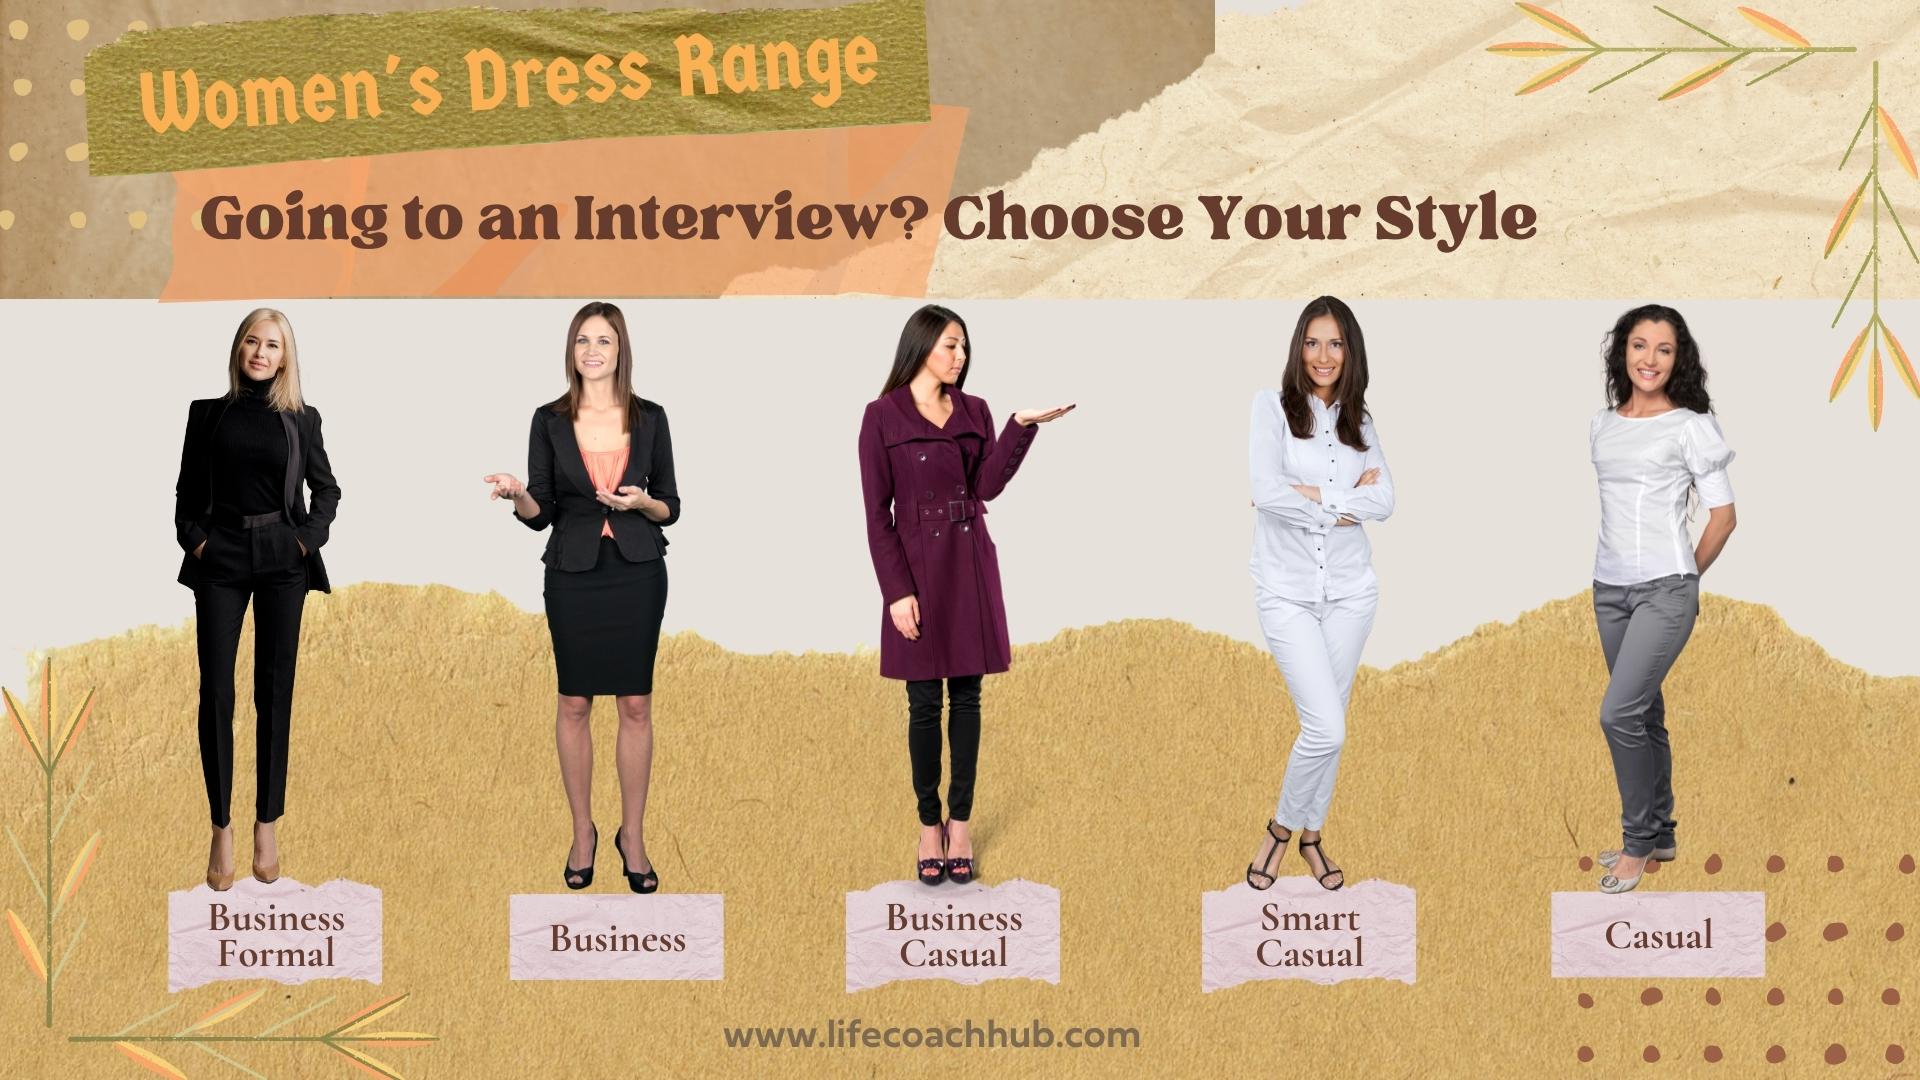 Women's business casual and formal range coaching tip